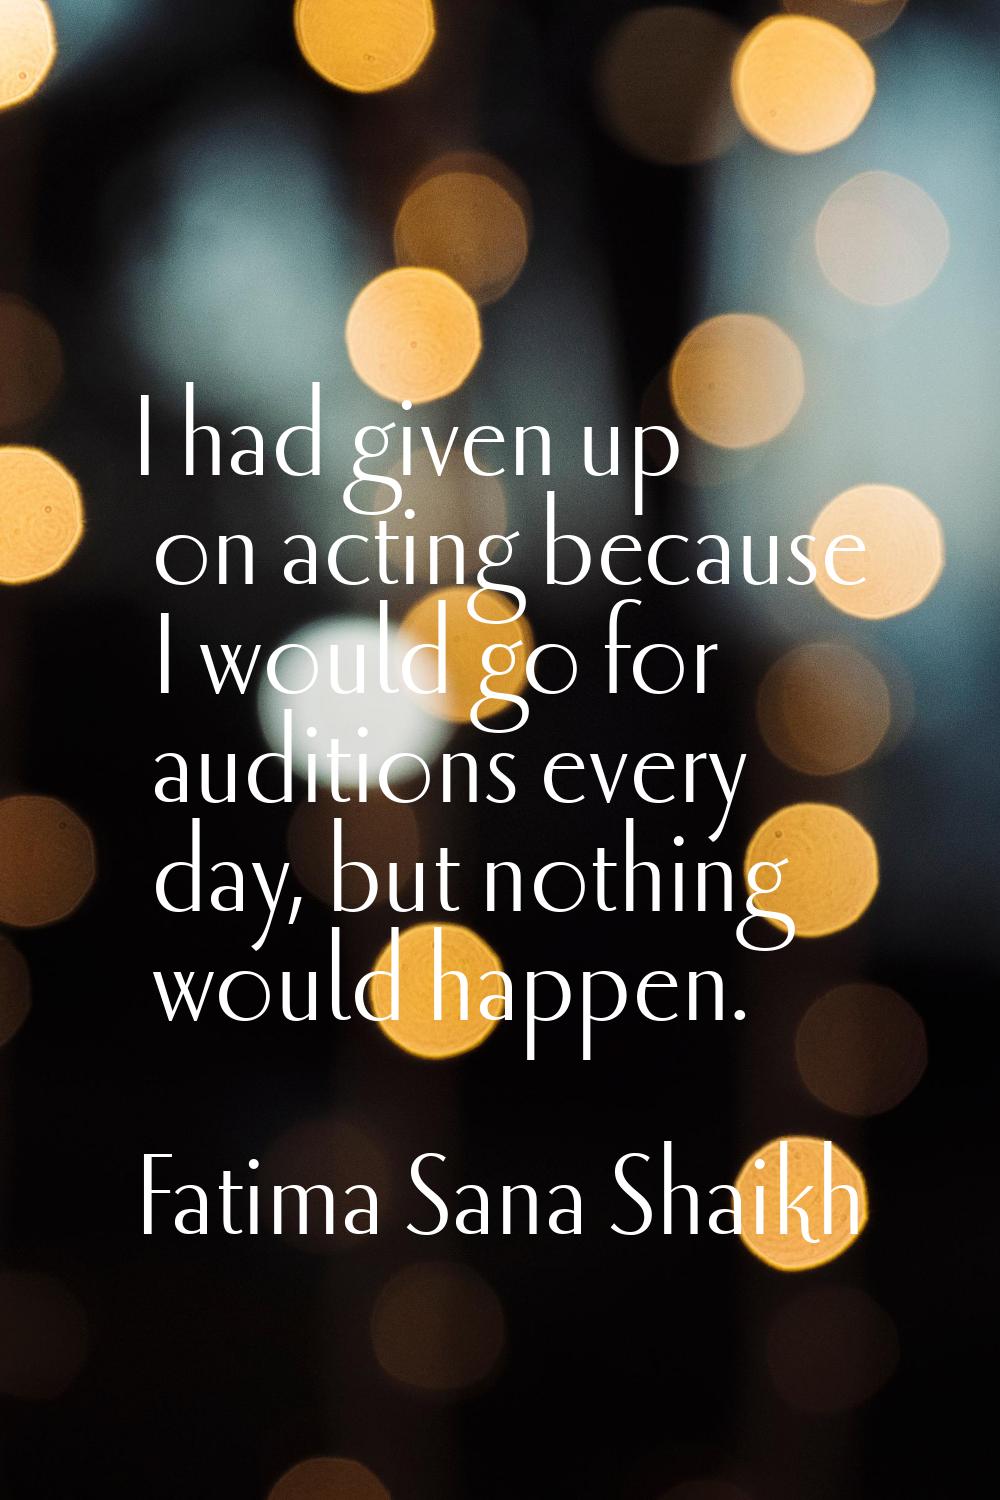 I had given up on acting because I would go for auditions every day, but nothing would happen.